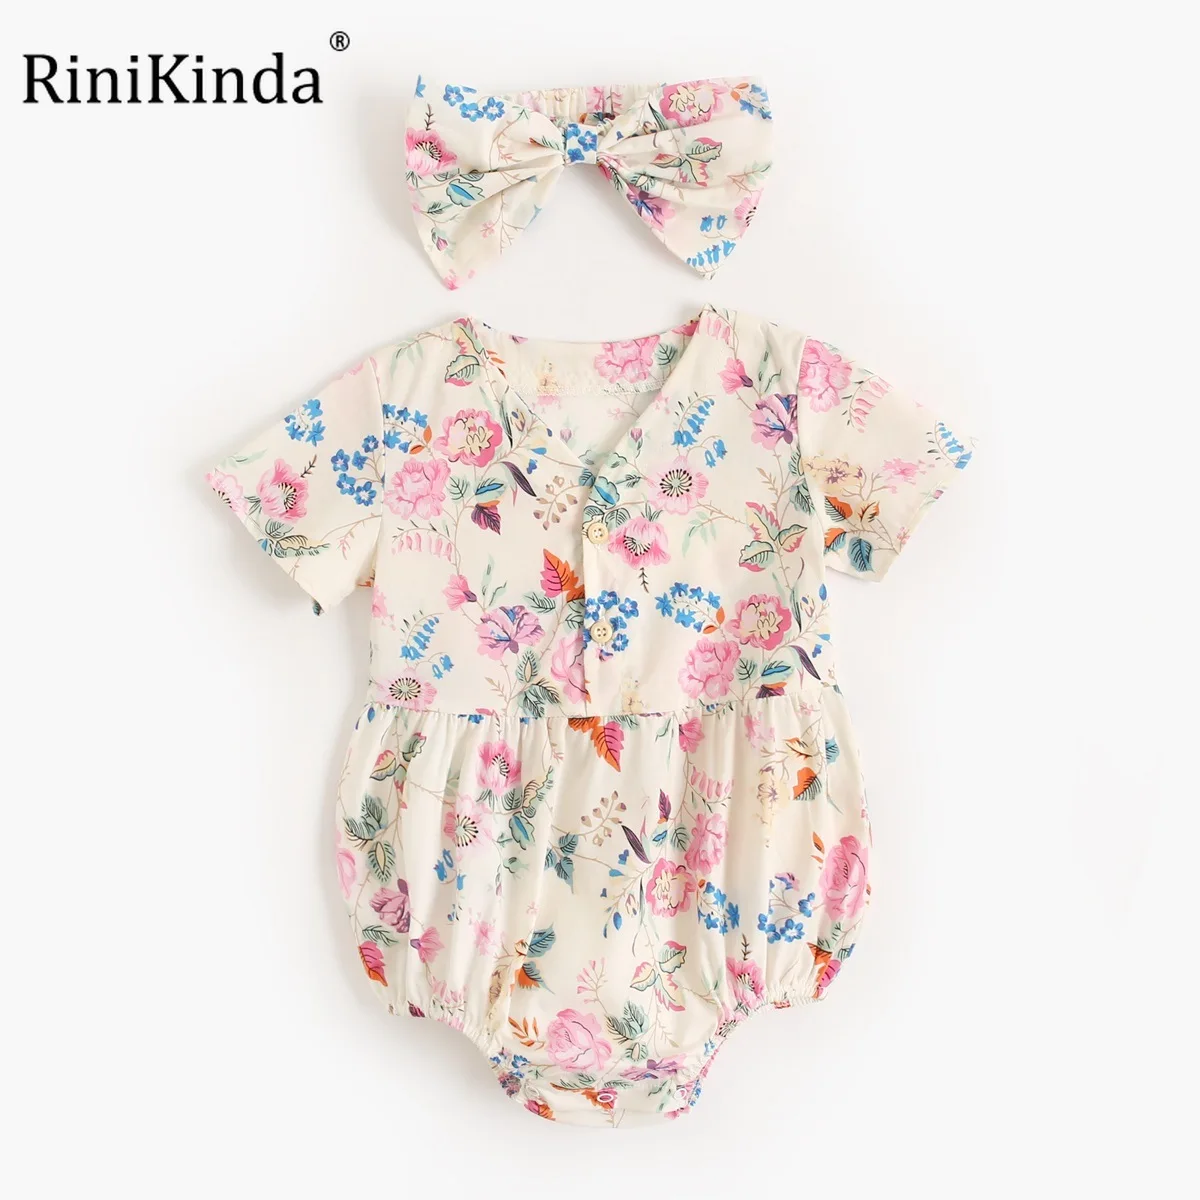 

RiniKinda Newborn Baby Clothes Girls Romper Summer New Cotton Floral Baby Girl One Piece Clothes All Match Toddler Onesies